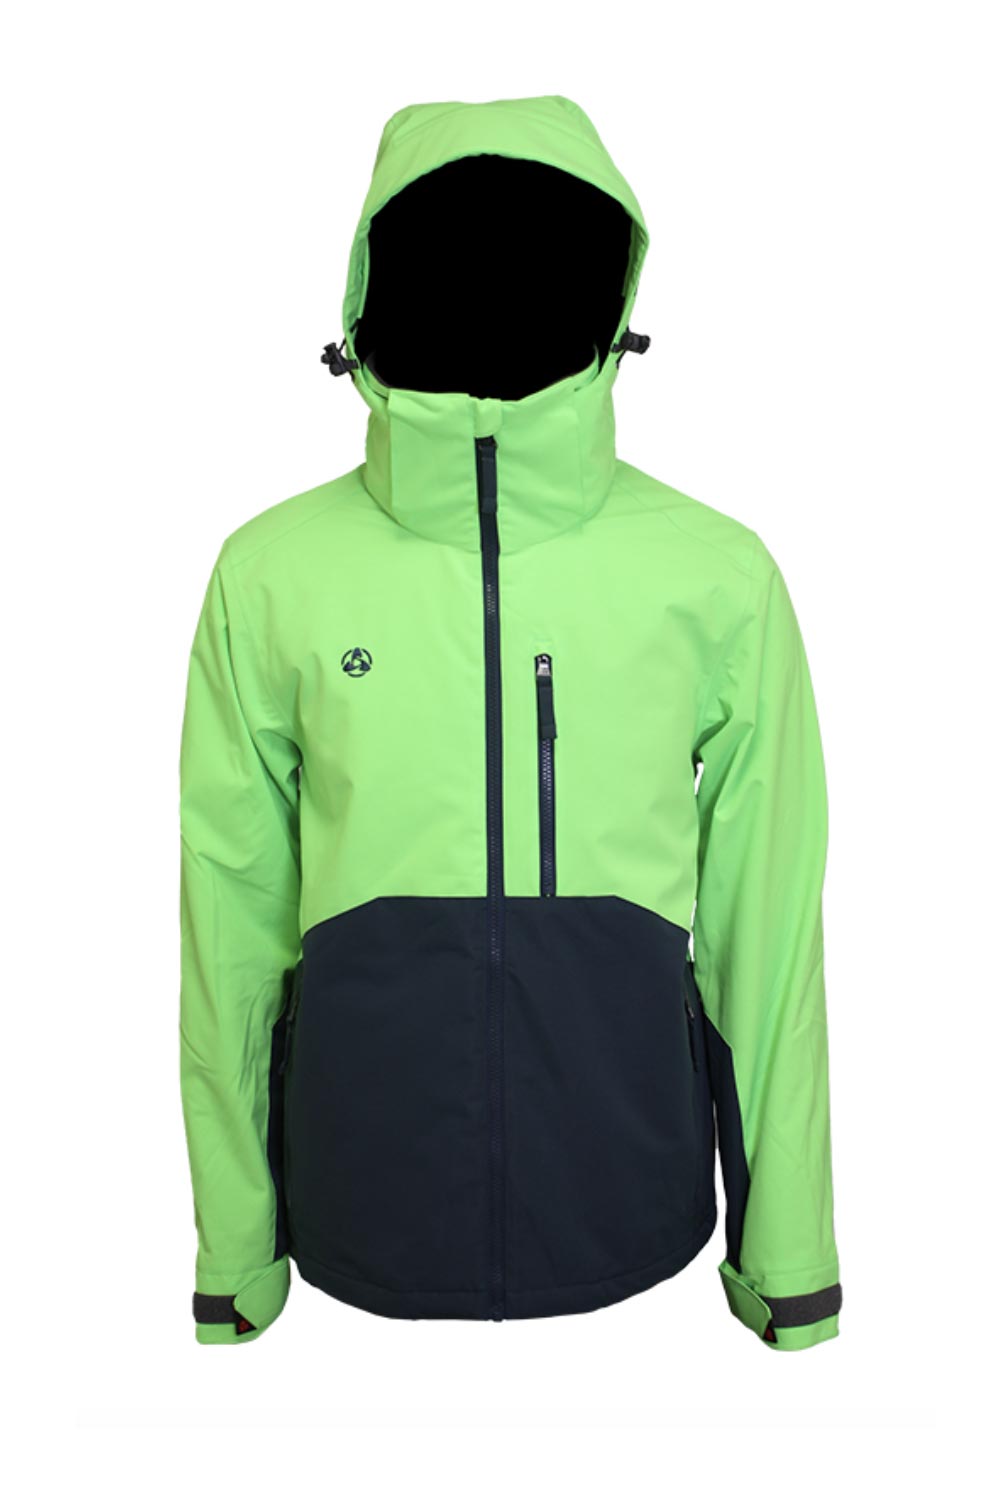 men's Turbine Boot Pack ski/snowboard jacket, lime green and navy blue